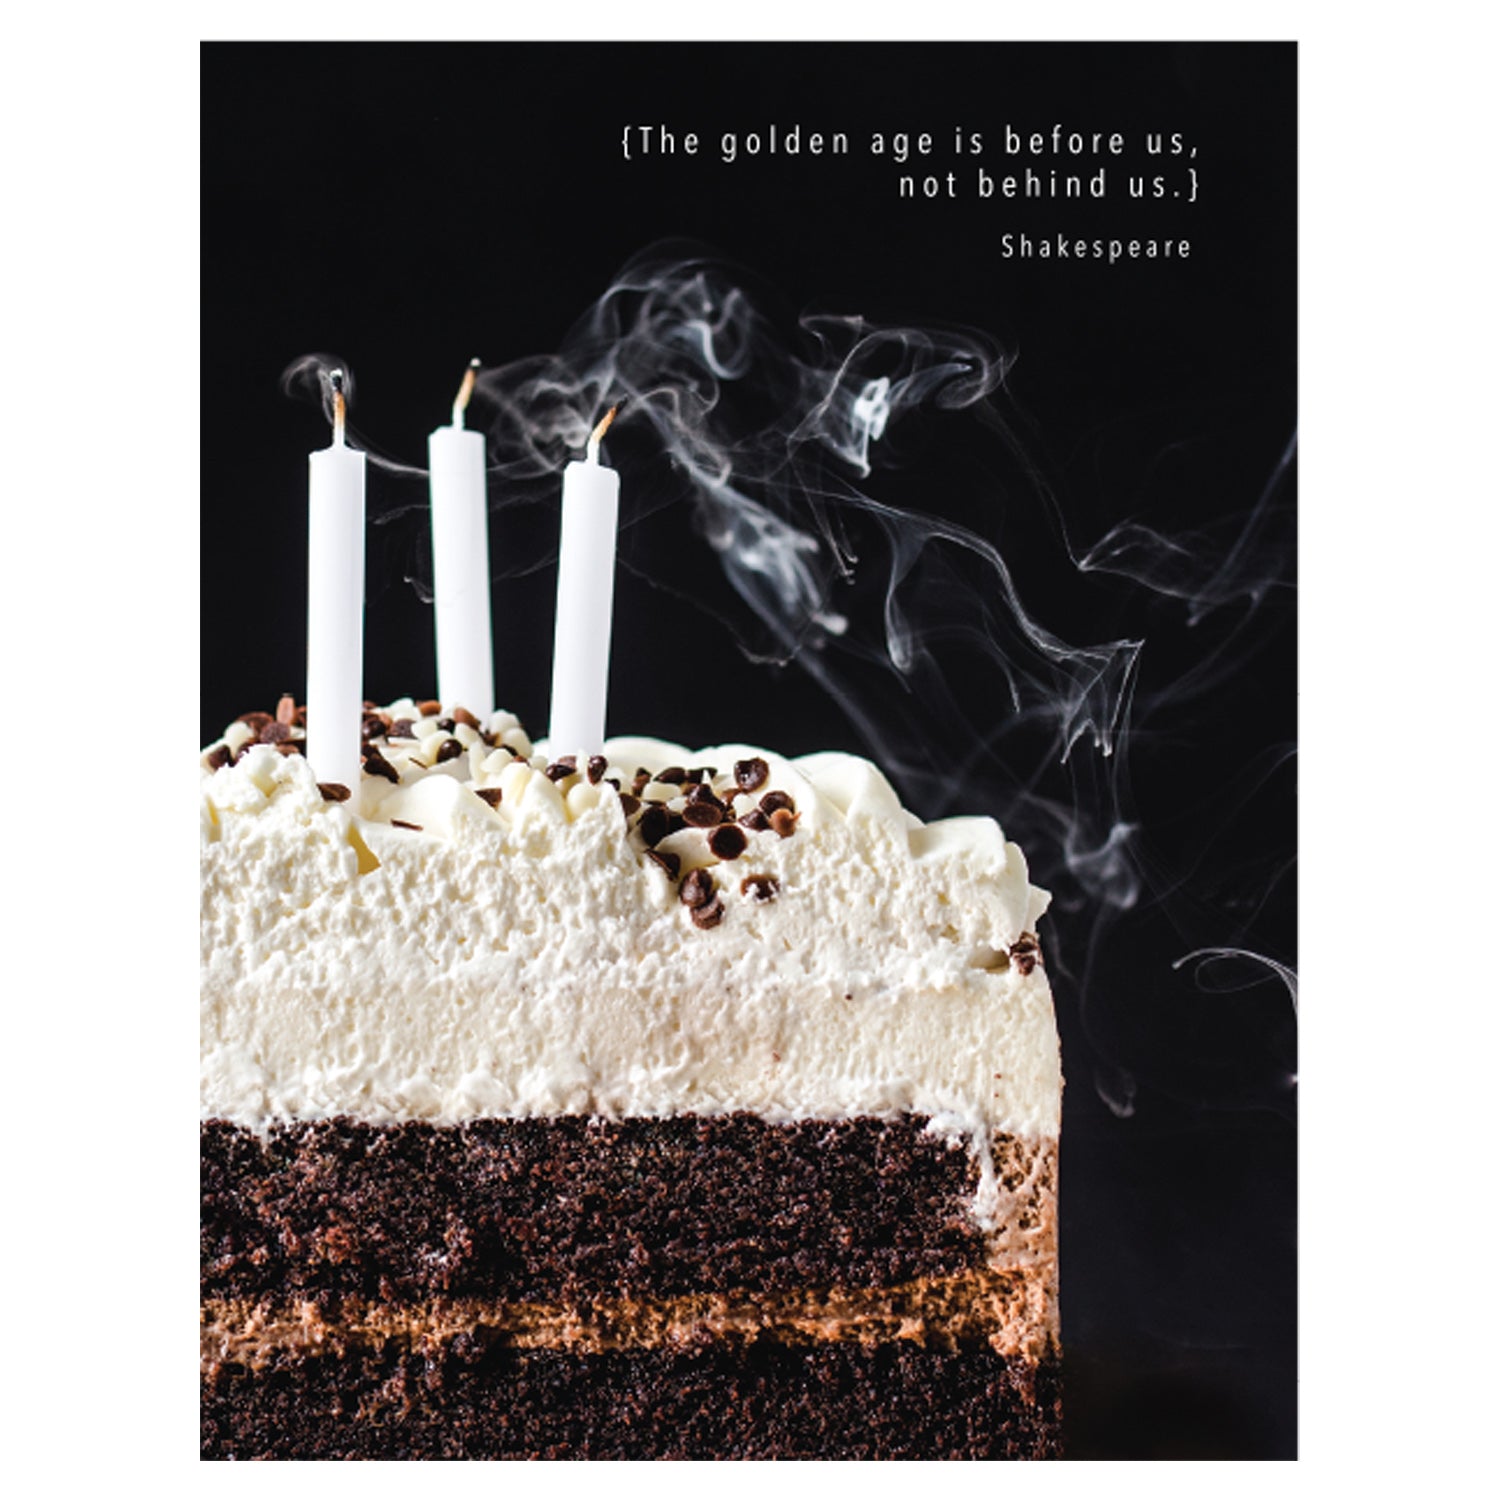 A close-up photo of a slice of white-frosted chocolate cake with three smokey, freshly blown-out candles on a black background, with &quot;{The golden age is before us, not behind us.} Shakespeare&quot; printed in white at the top of the card.